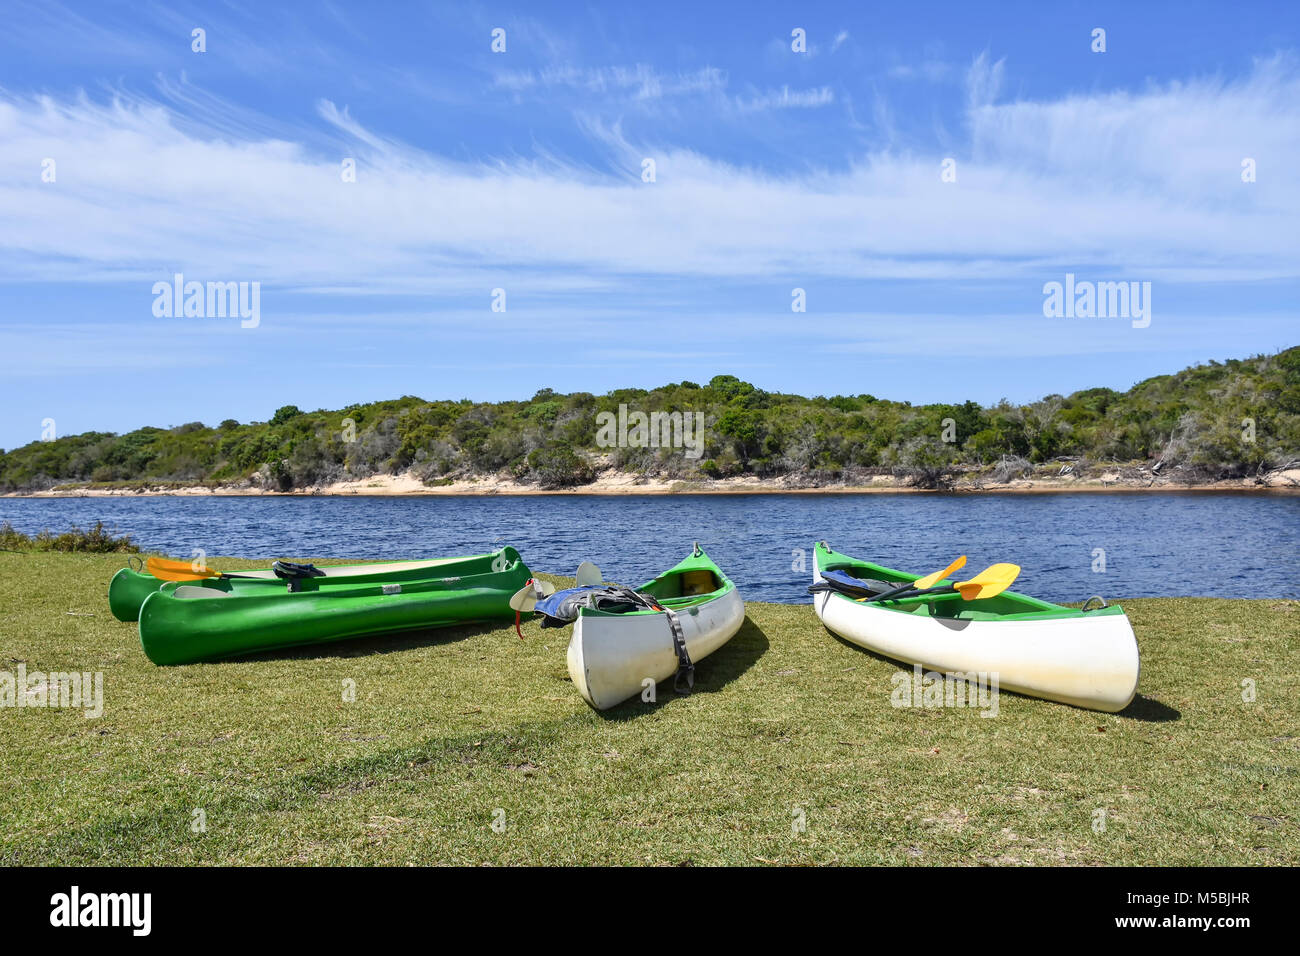 Several kayaks on a grass field near the lagoon of Goukamma near Knysna on the Garden Route in South Africa Stock Photo